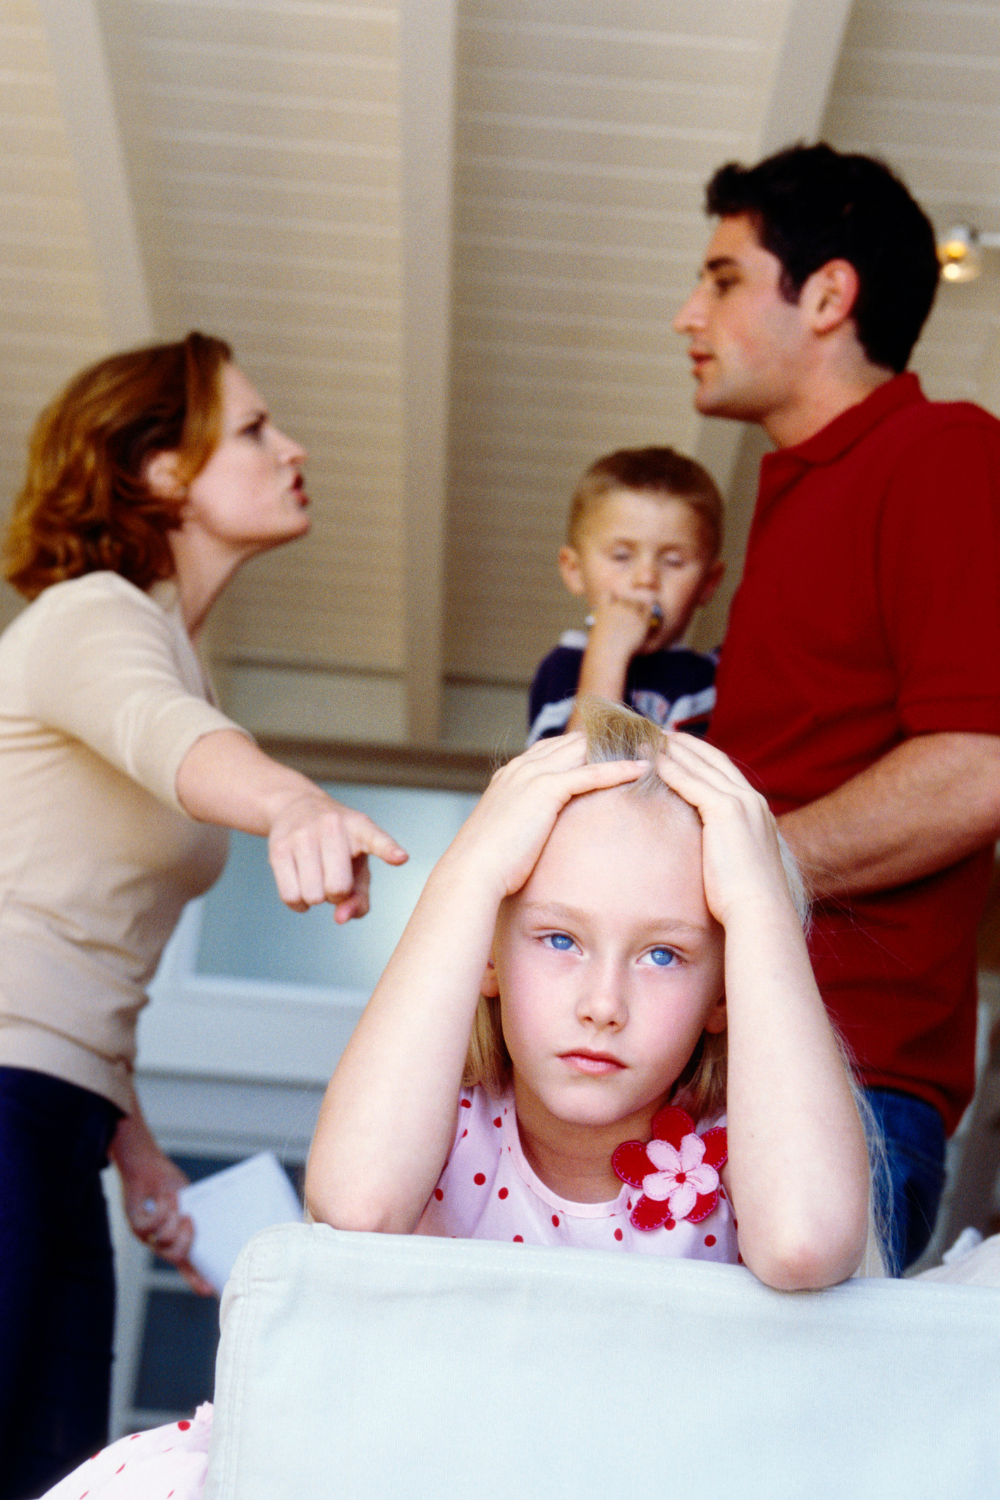 Ways To Avoid Being A Narcissistic Parent